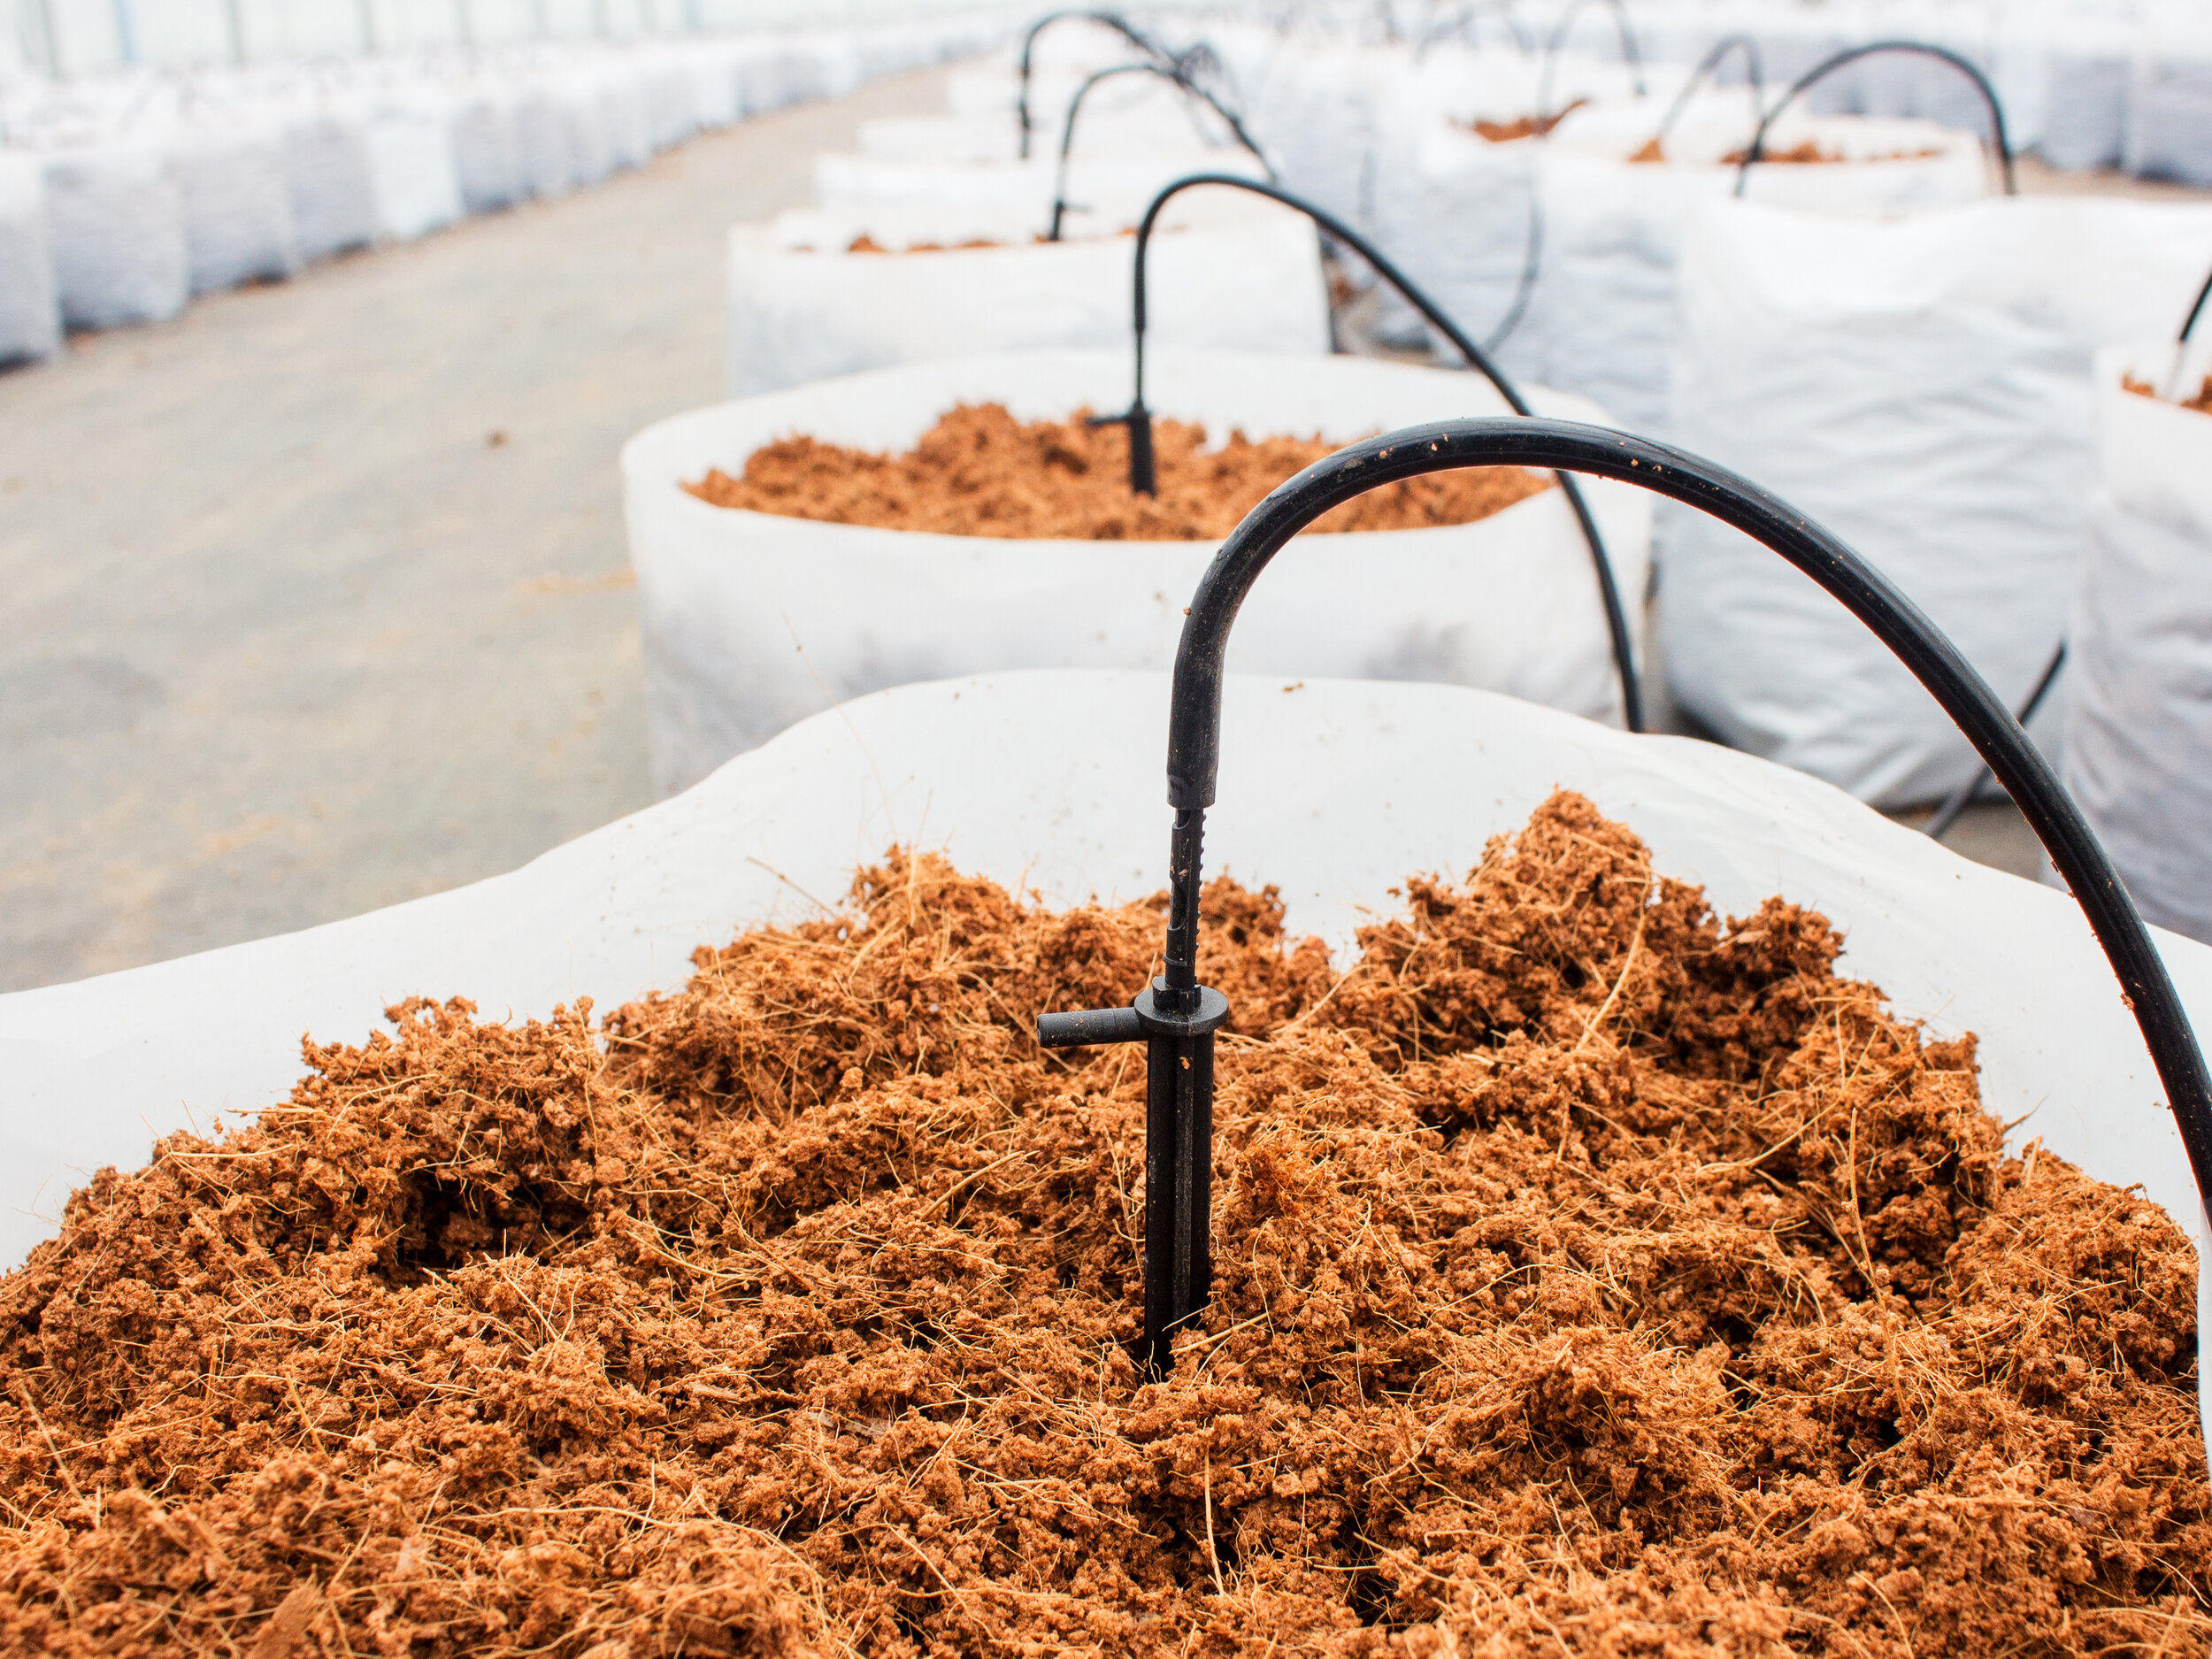 preparation-coco-peat-cultivation-vegetable-with-drip-irrigation-system.jpg